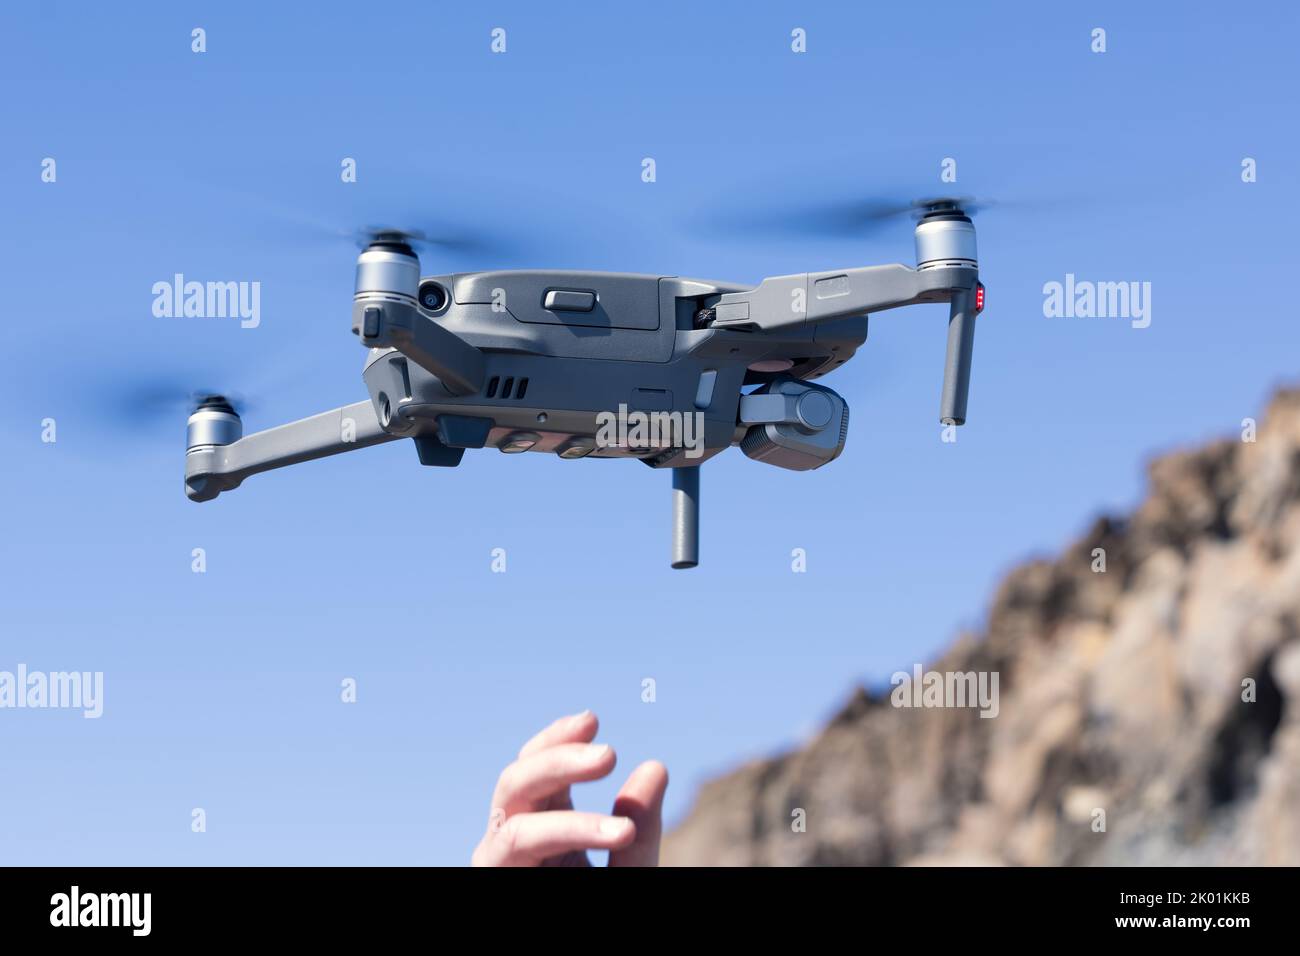 Man Hand launching a drone against blue sky Stock Photo